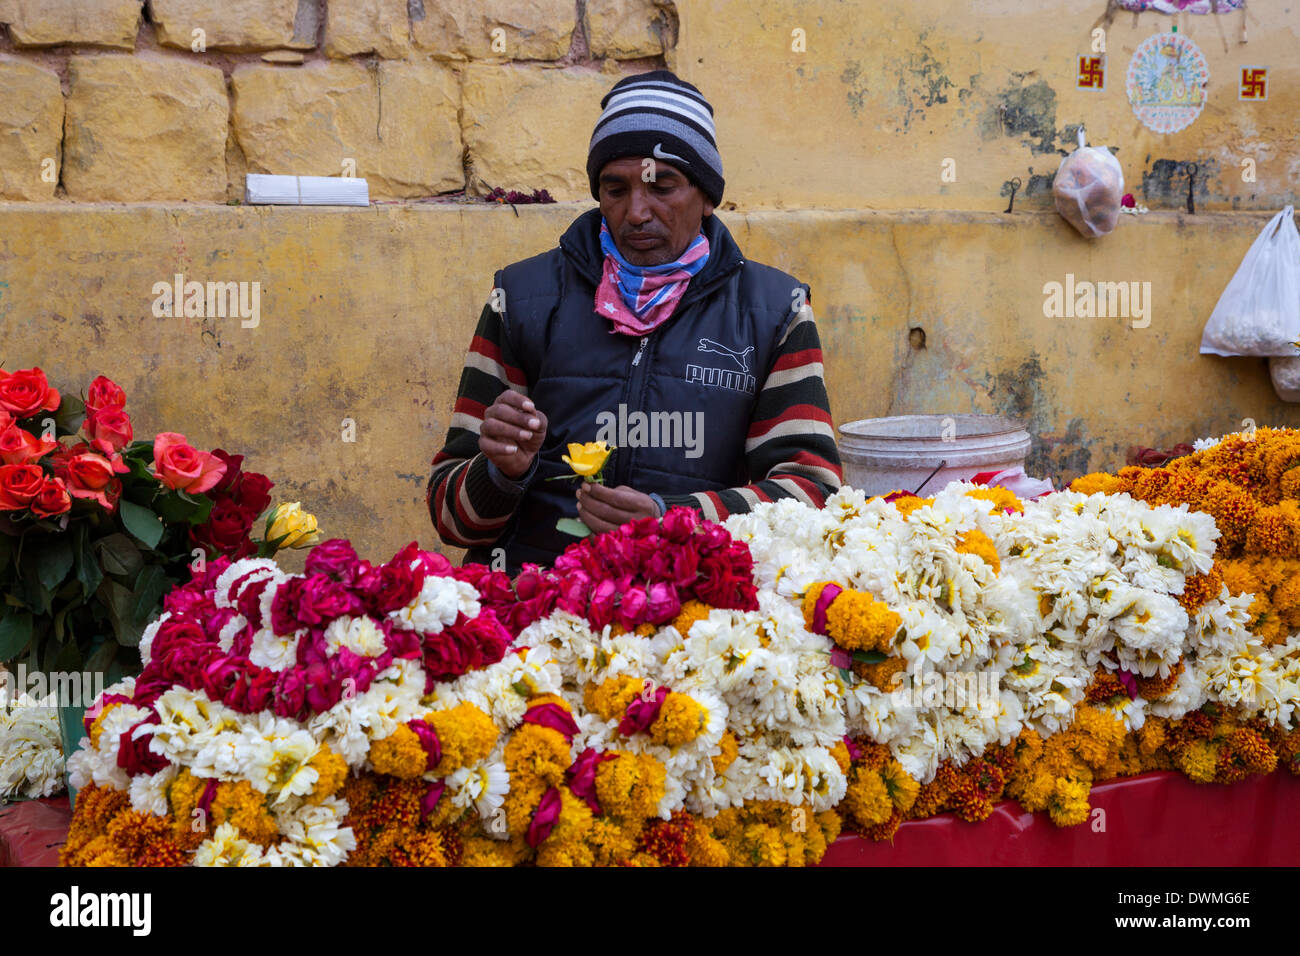 Jaipur, Rajasthan, India. Vendor of Flower Garlands for a Nearby Temple.  Hindu swastikas on wall for good luck. Stock Photo